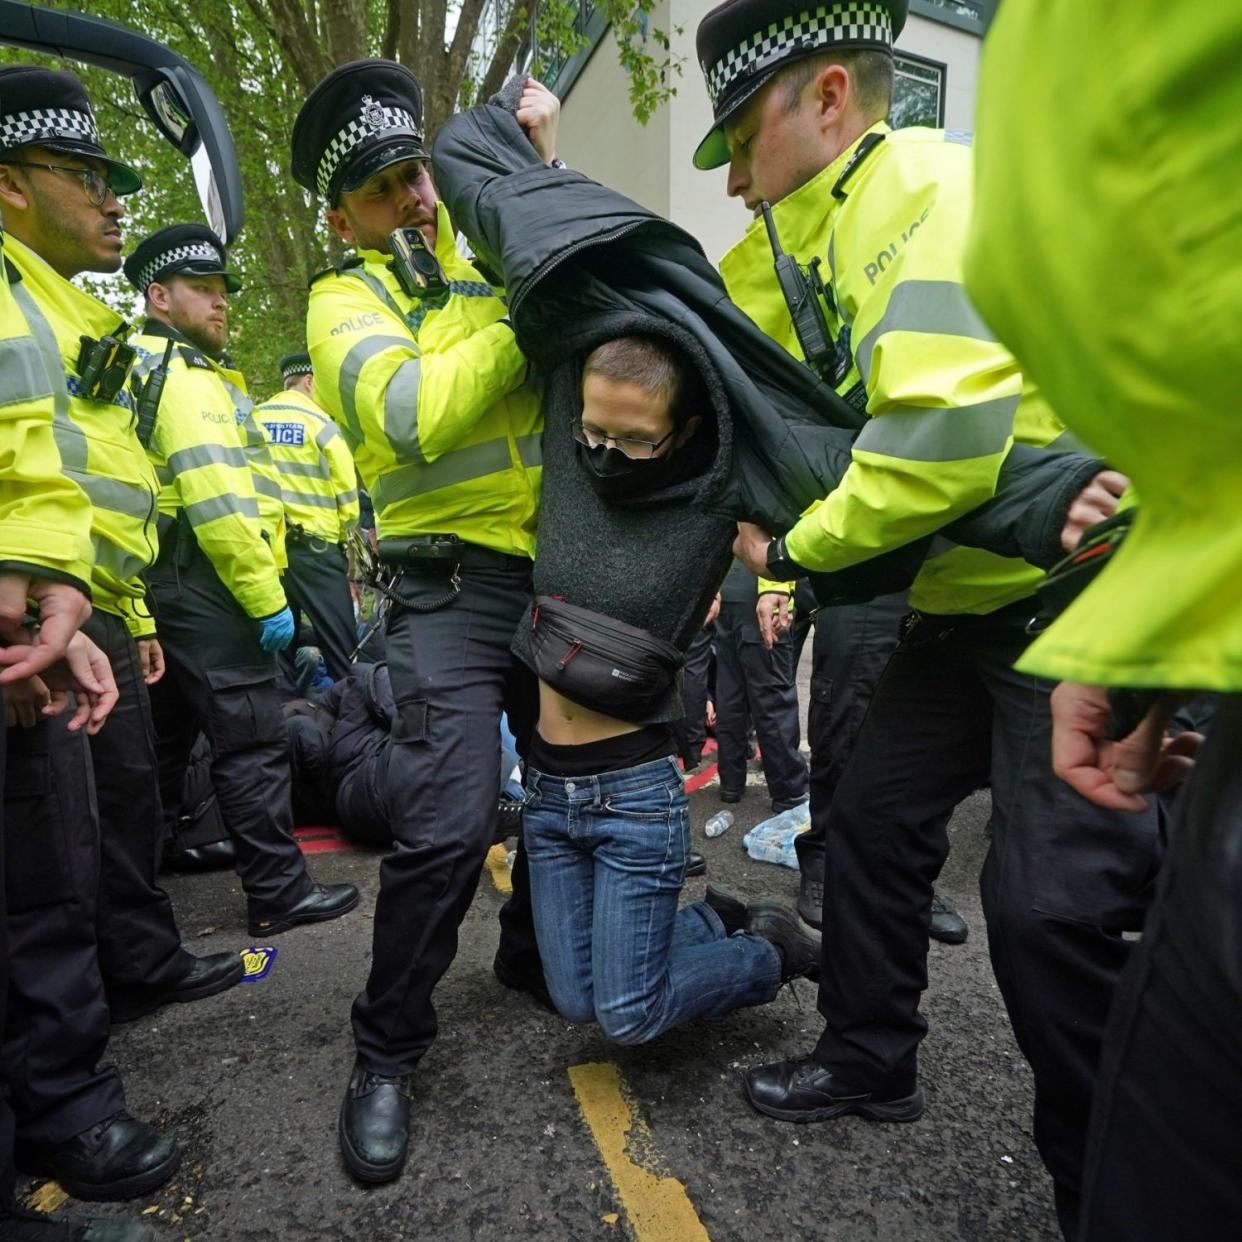 A protester struggling with officers